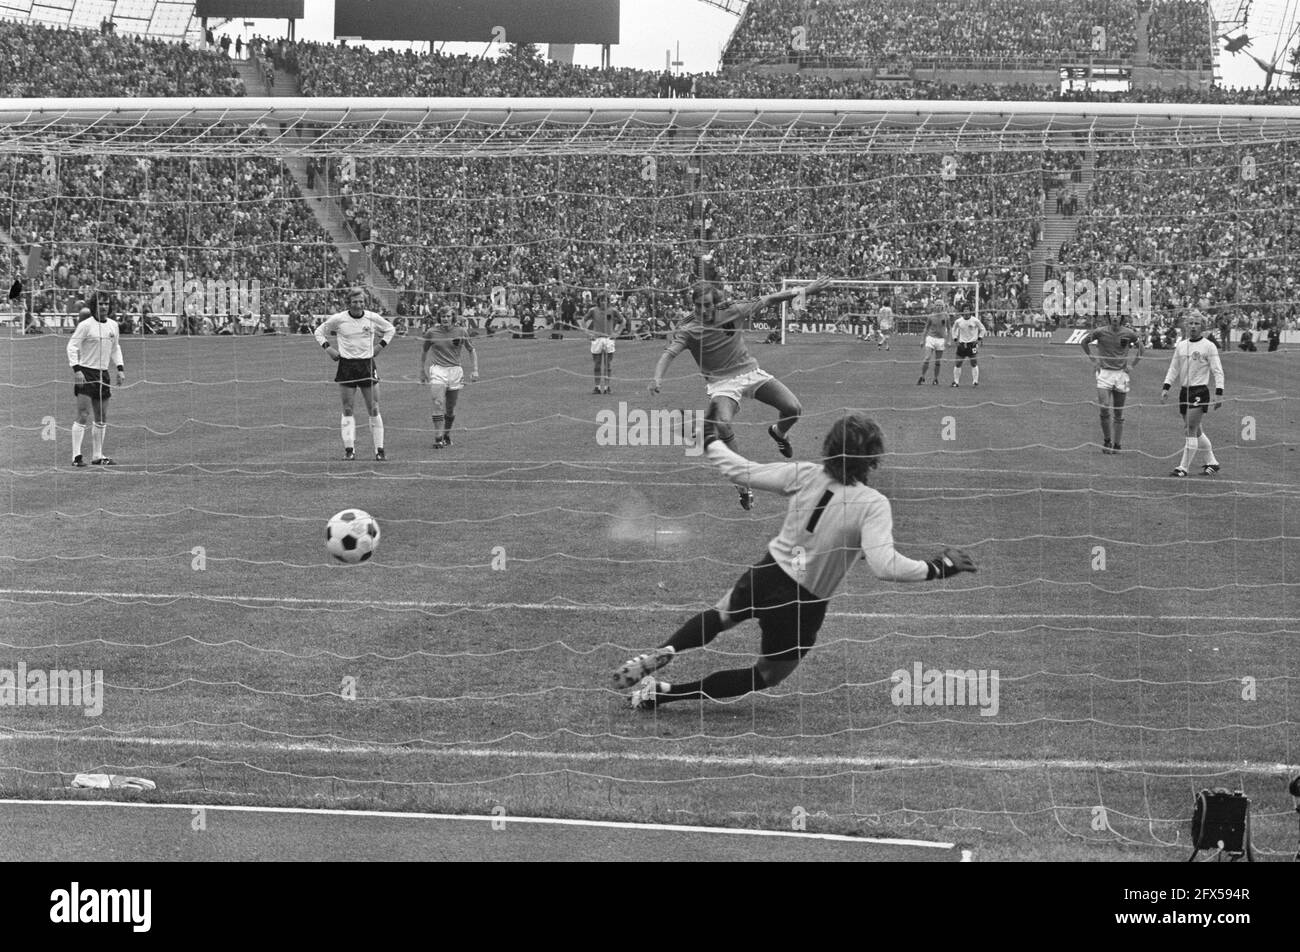 World Cup final 1974 in Munich, West Germany against the Netherlands 2-1; Neeskens scores from penalty 0-1, goalkeeper Maier is chanceless, July 7, 1974, finals, goalkeepers, sports, soccer, world championships, The Netherlands, 20th century press agency photo, news to remember, documentary, historic photography 1945-1990, visual stories, human history of the Twentieth Century, capturing moments in time Stock Photo